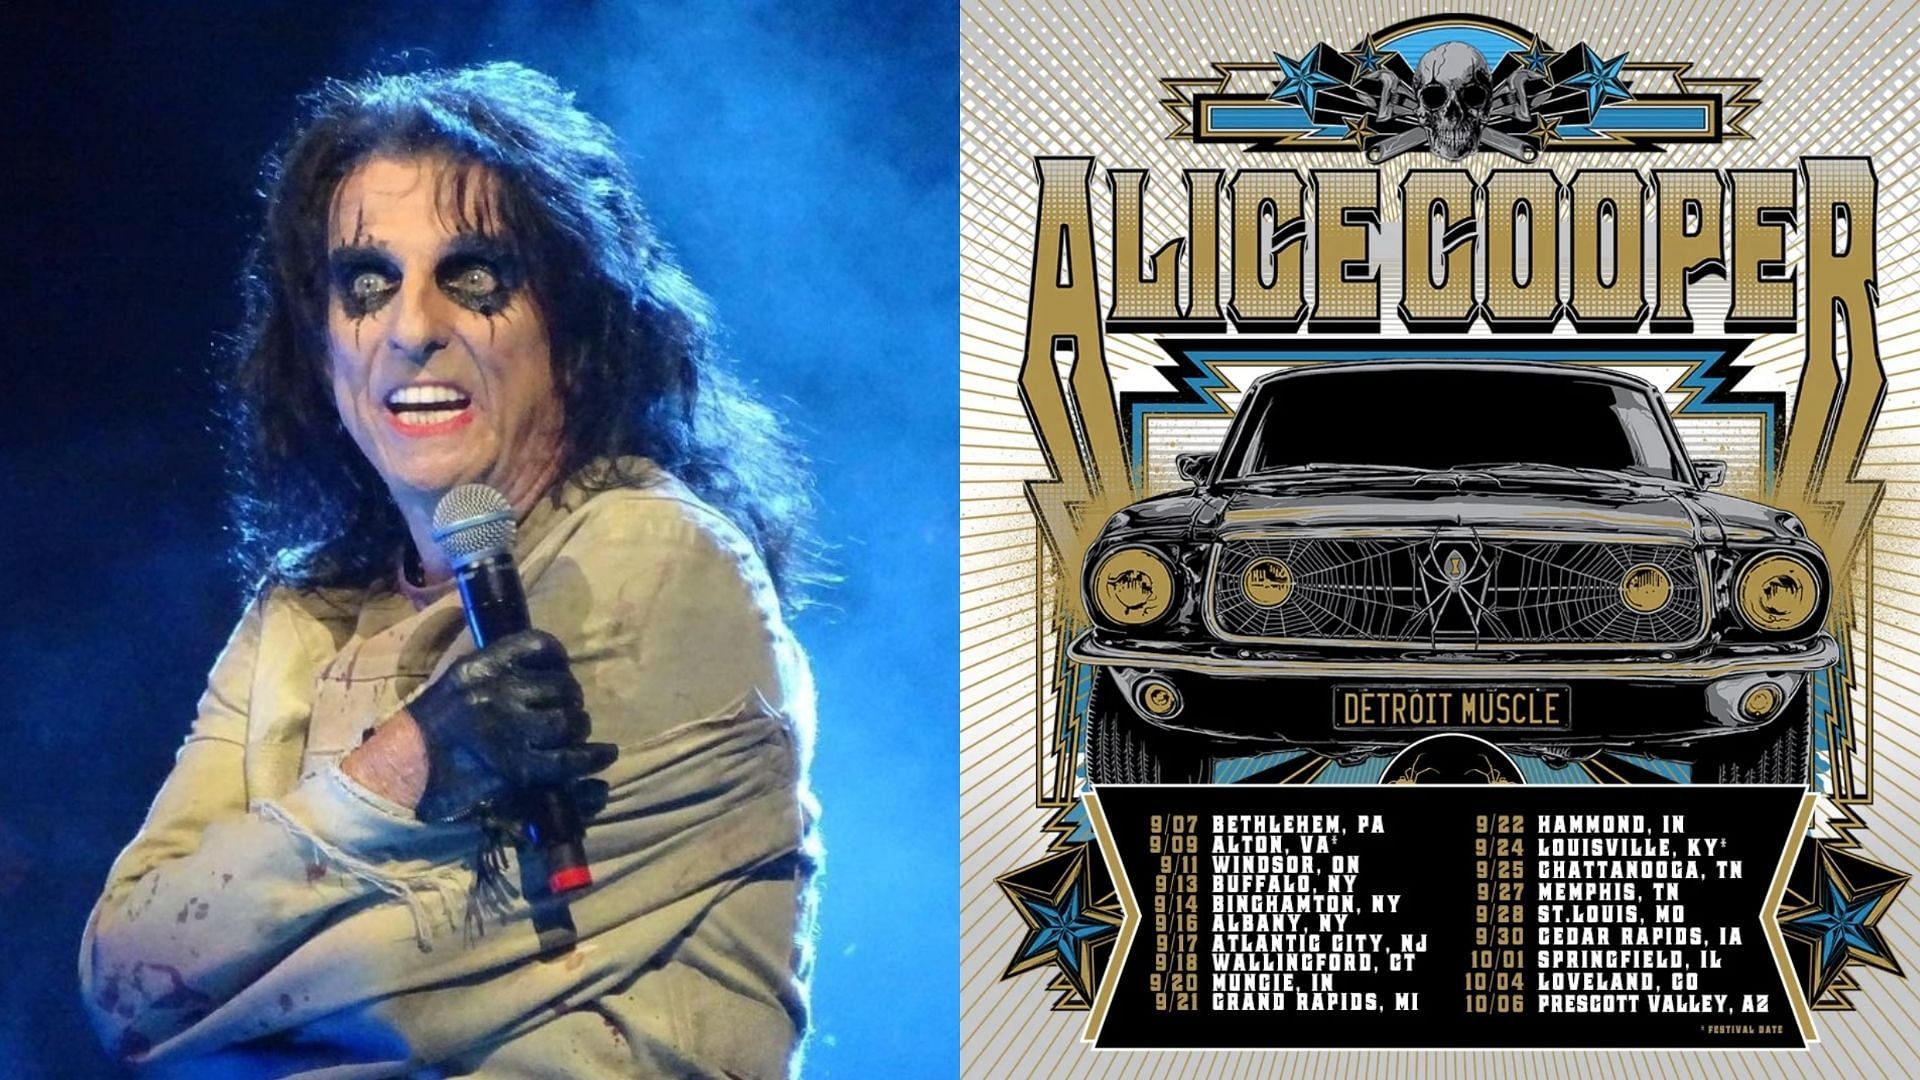 Alice Cooper 2022 Tour Tickets, presale, where to buy, dates and more